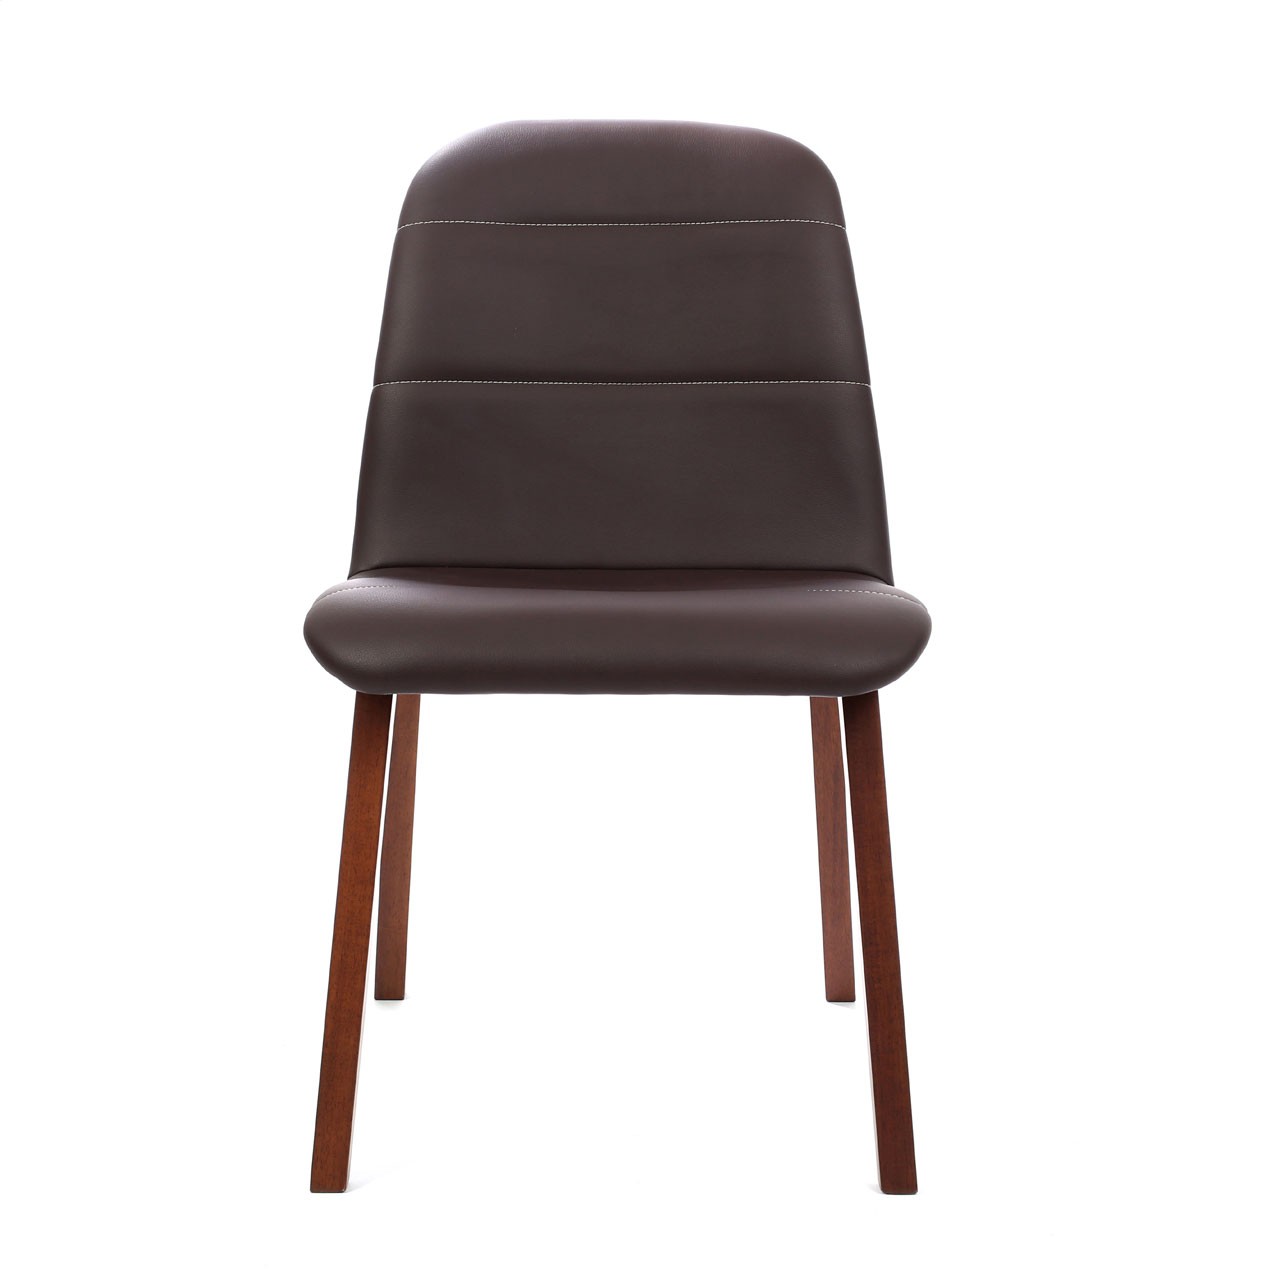 Dining Chair, Chocolate Leather Effect, Walnut Legs - Set Of 2